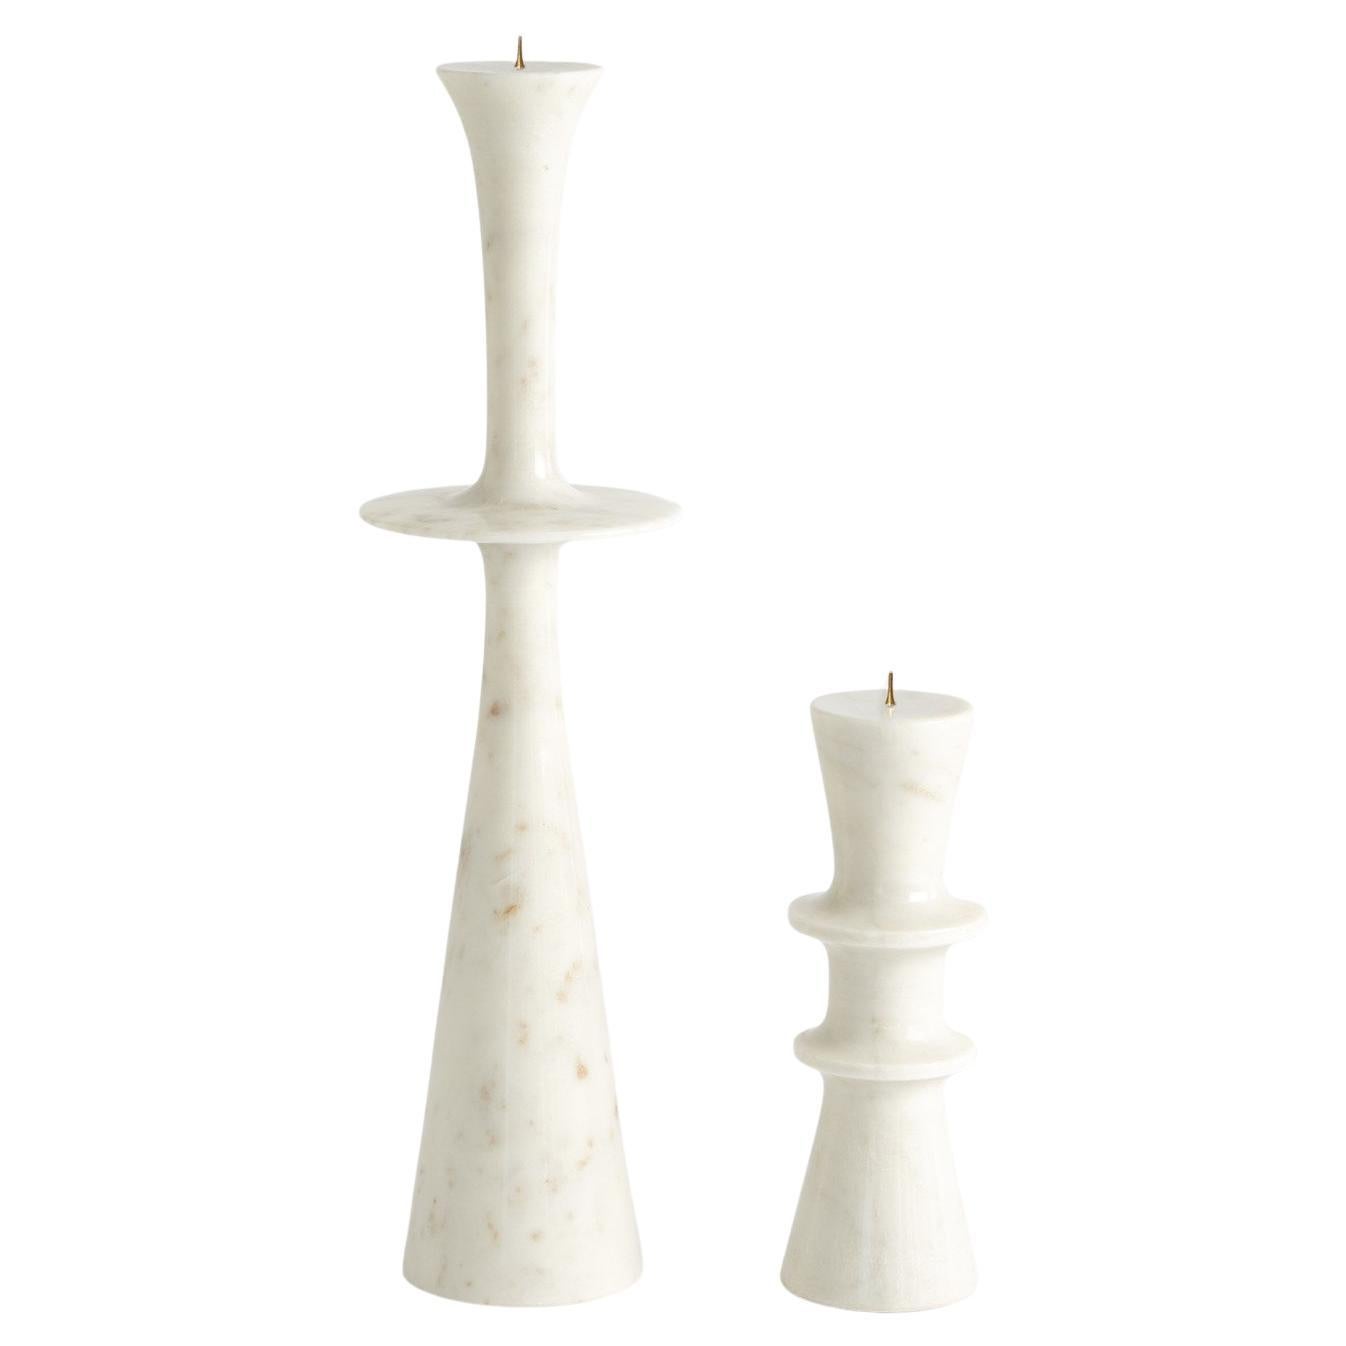 White Marble Flair Candle Stand, Sourced by Martyn Lawrence Bullard
Made of hand formed marble with a iron candle spike